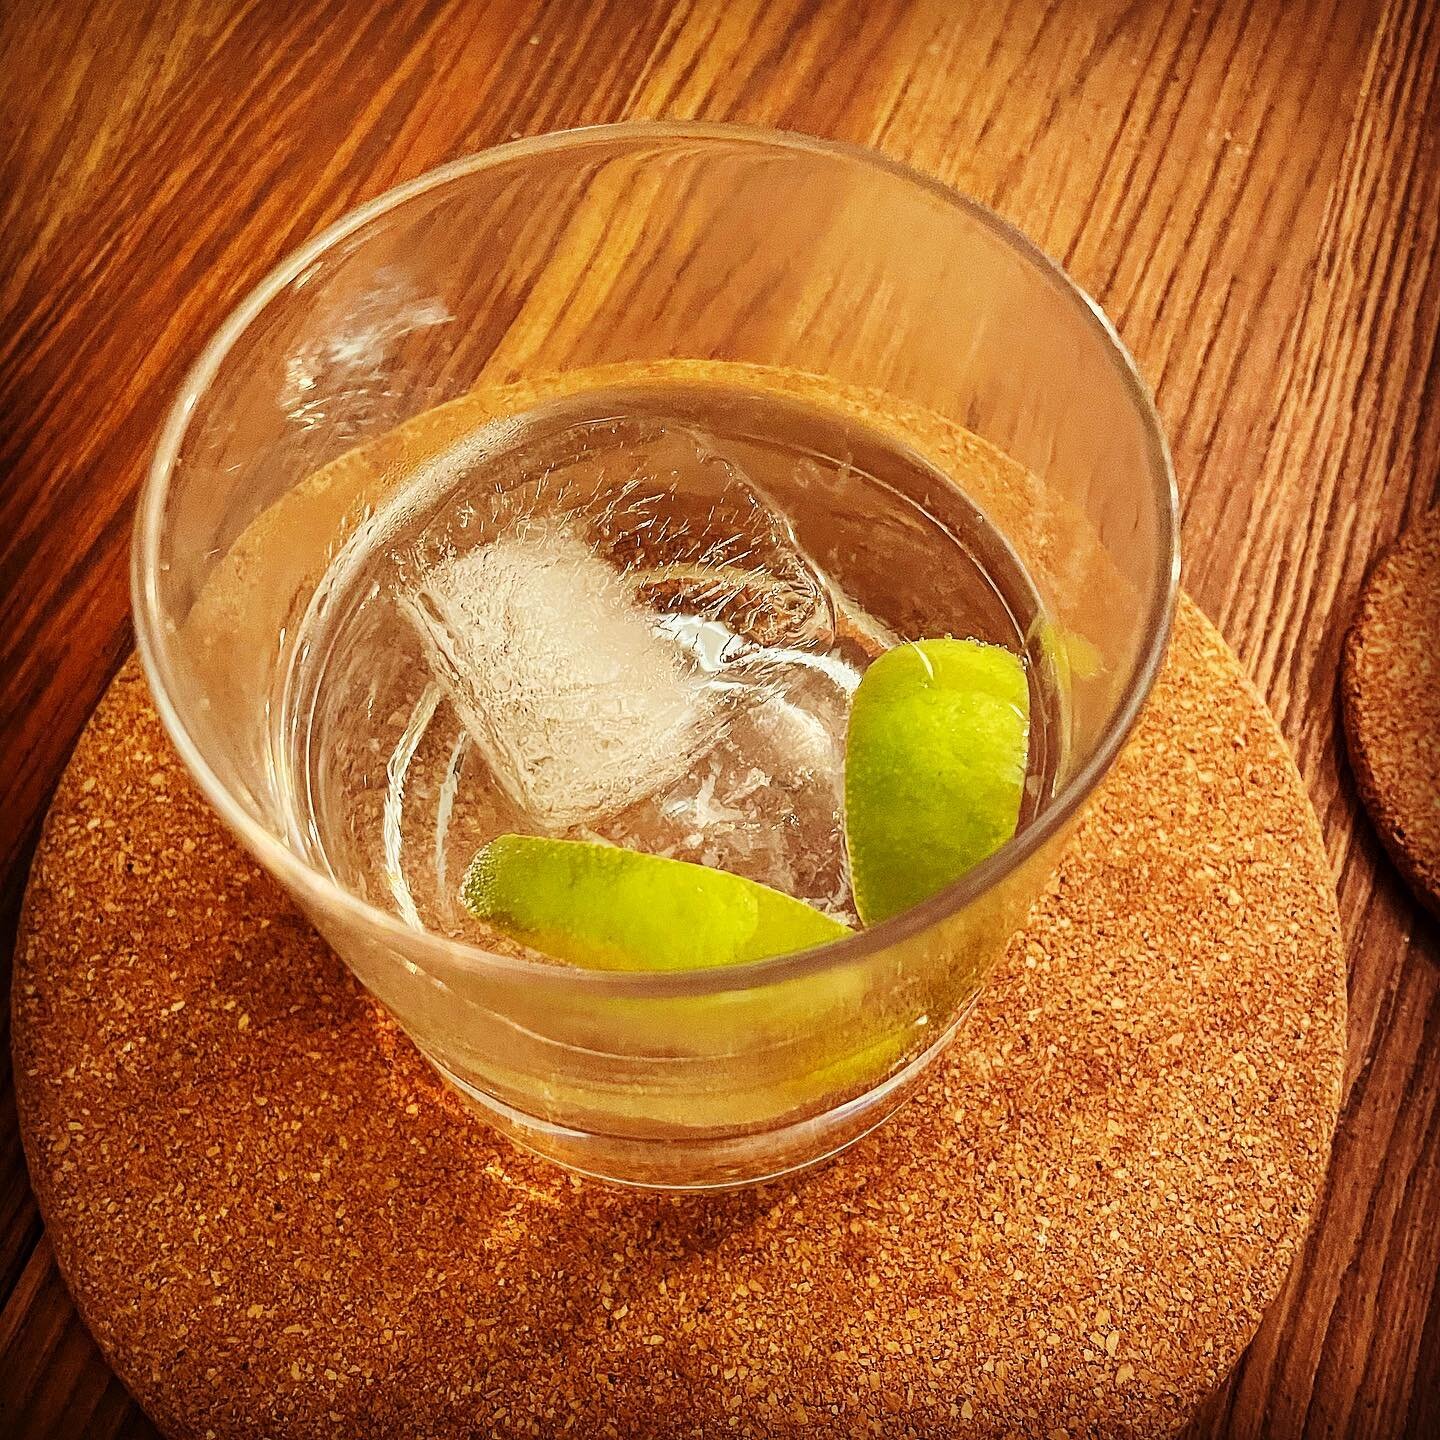 This week wrung me out in every single sense, but it also made me feel a deep kind of lucky. Here&rsquo;s to earning this gin and tonic, and to work that, I really hope, matters!